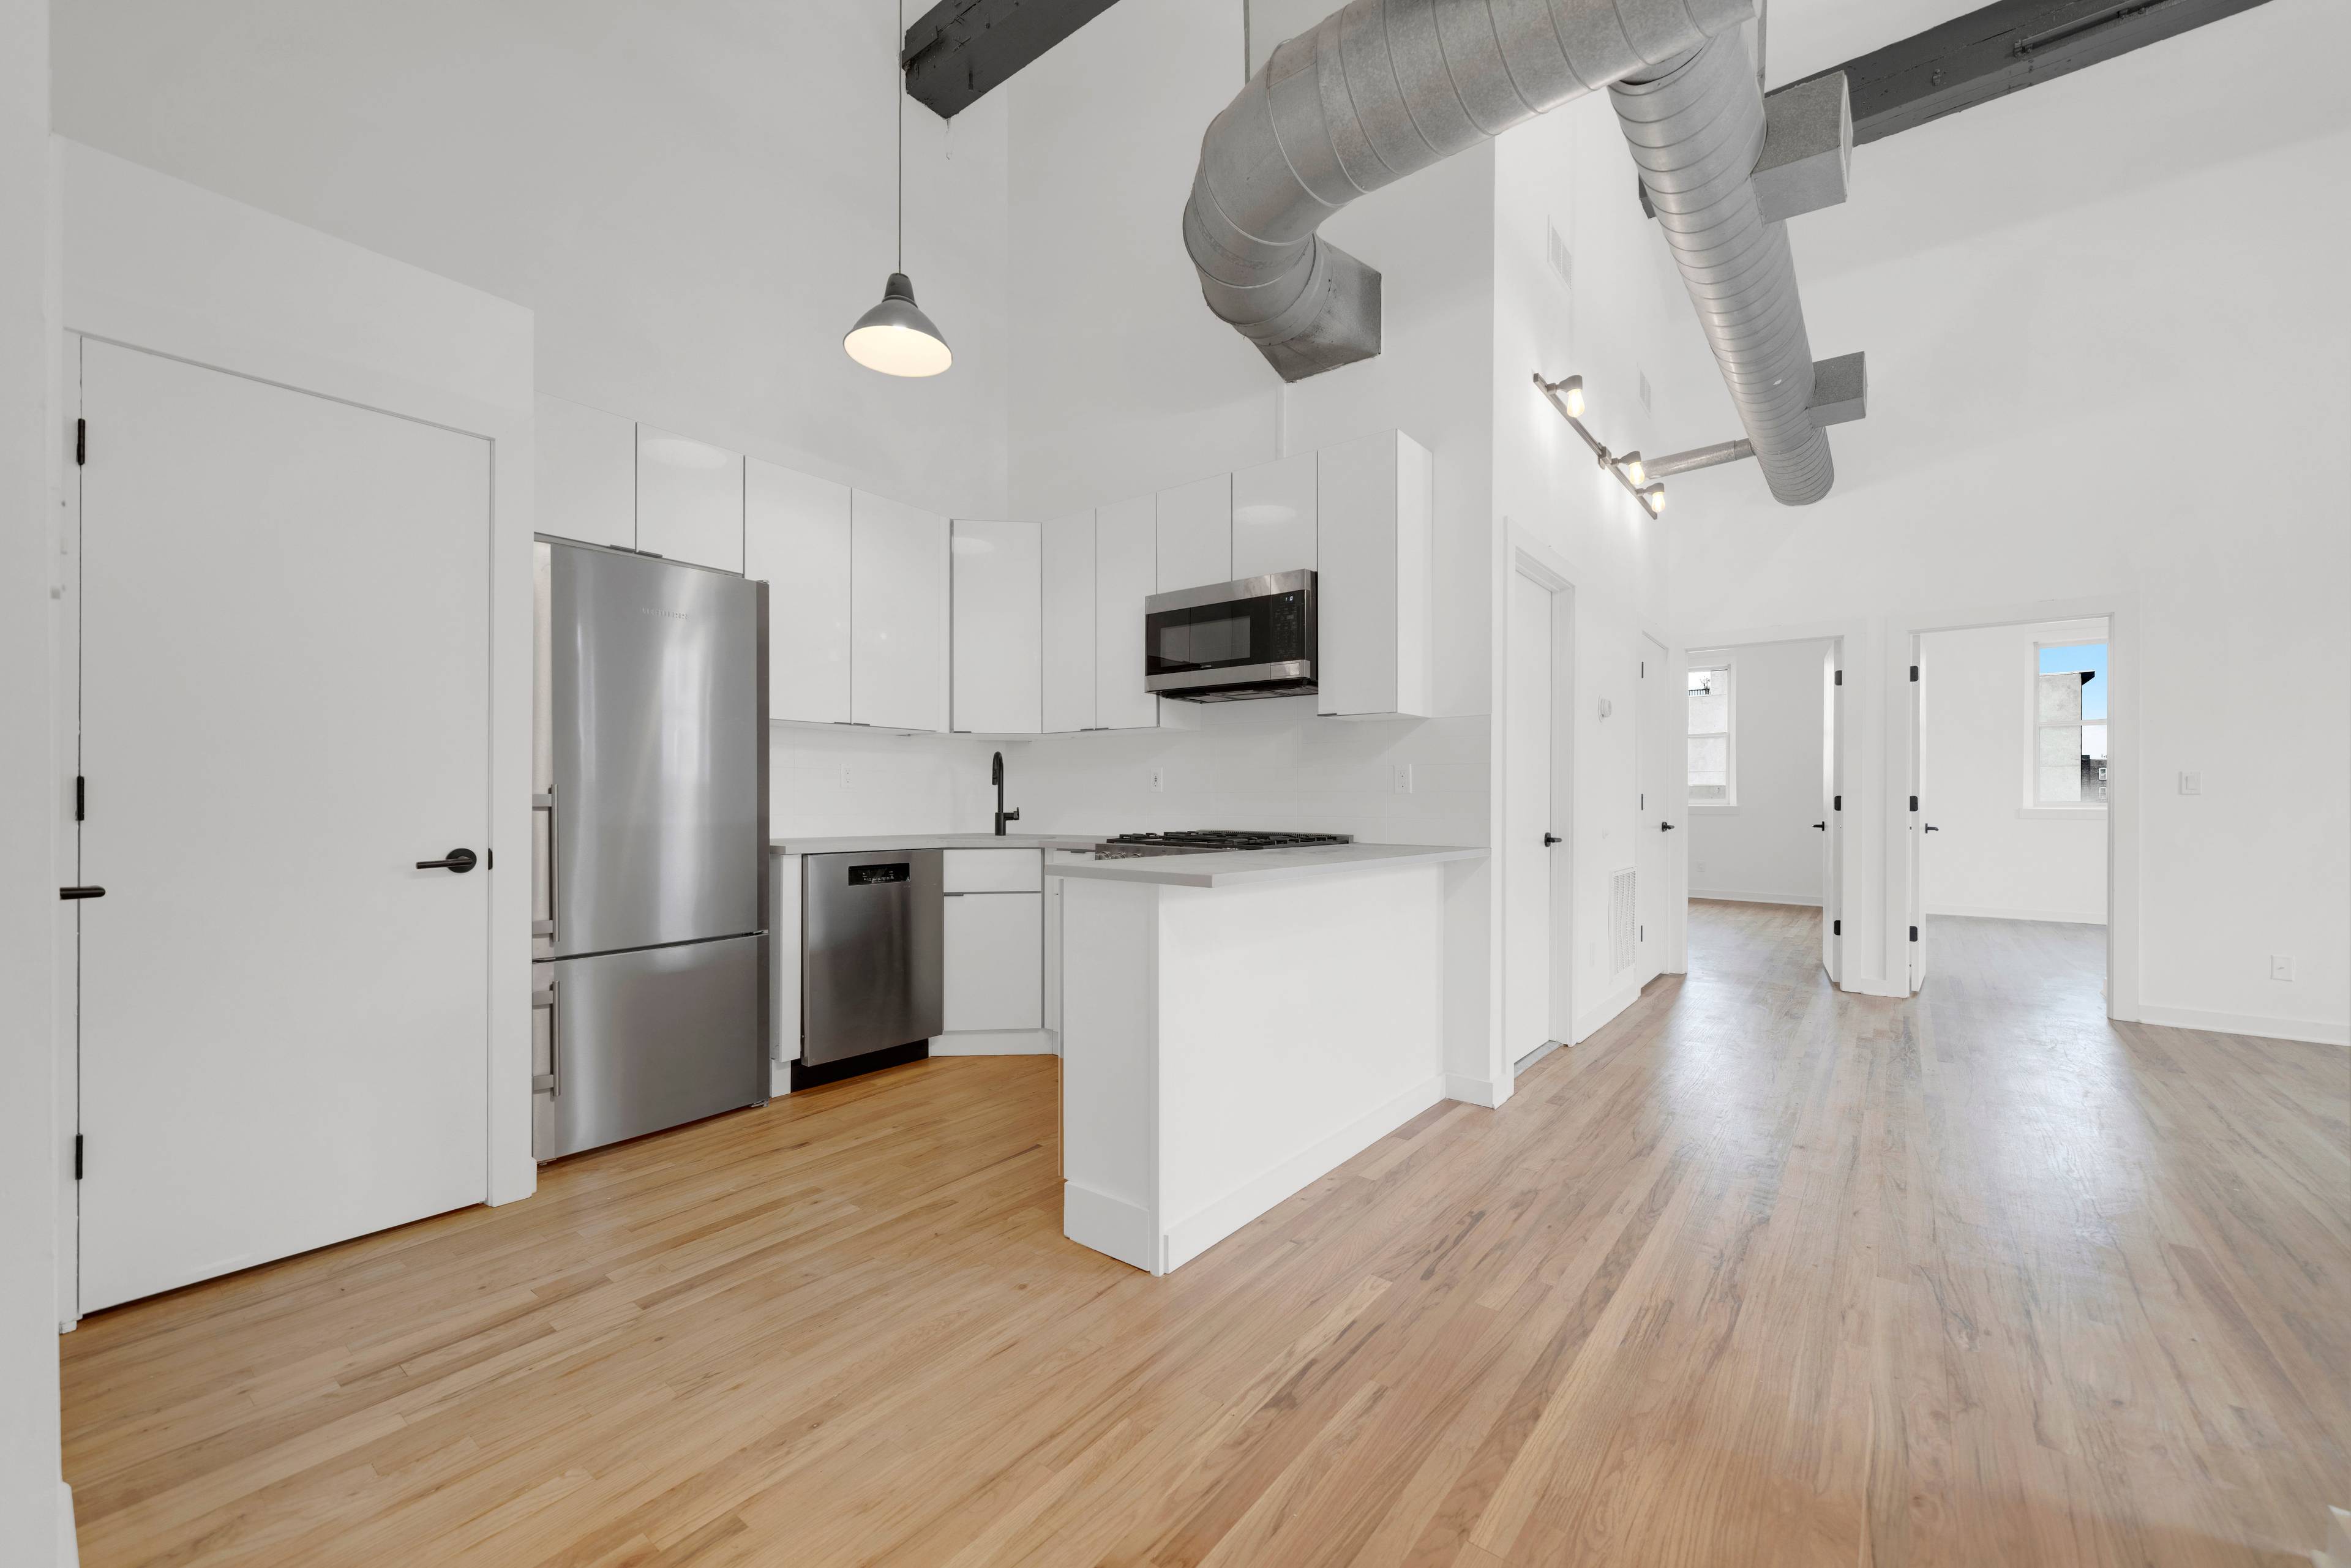 Brand New Renovated High Ceilings 3 Bedroom 2 Full Baths located in Hoboken NJ! 25% Reduced Broker Fee Special and 1.5 Months Free on an 18 Month Lease. Washer/Dryer In Unit and Building!